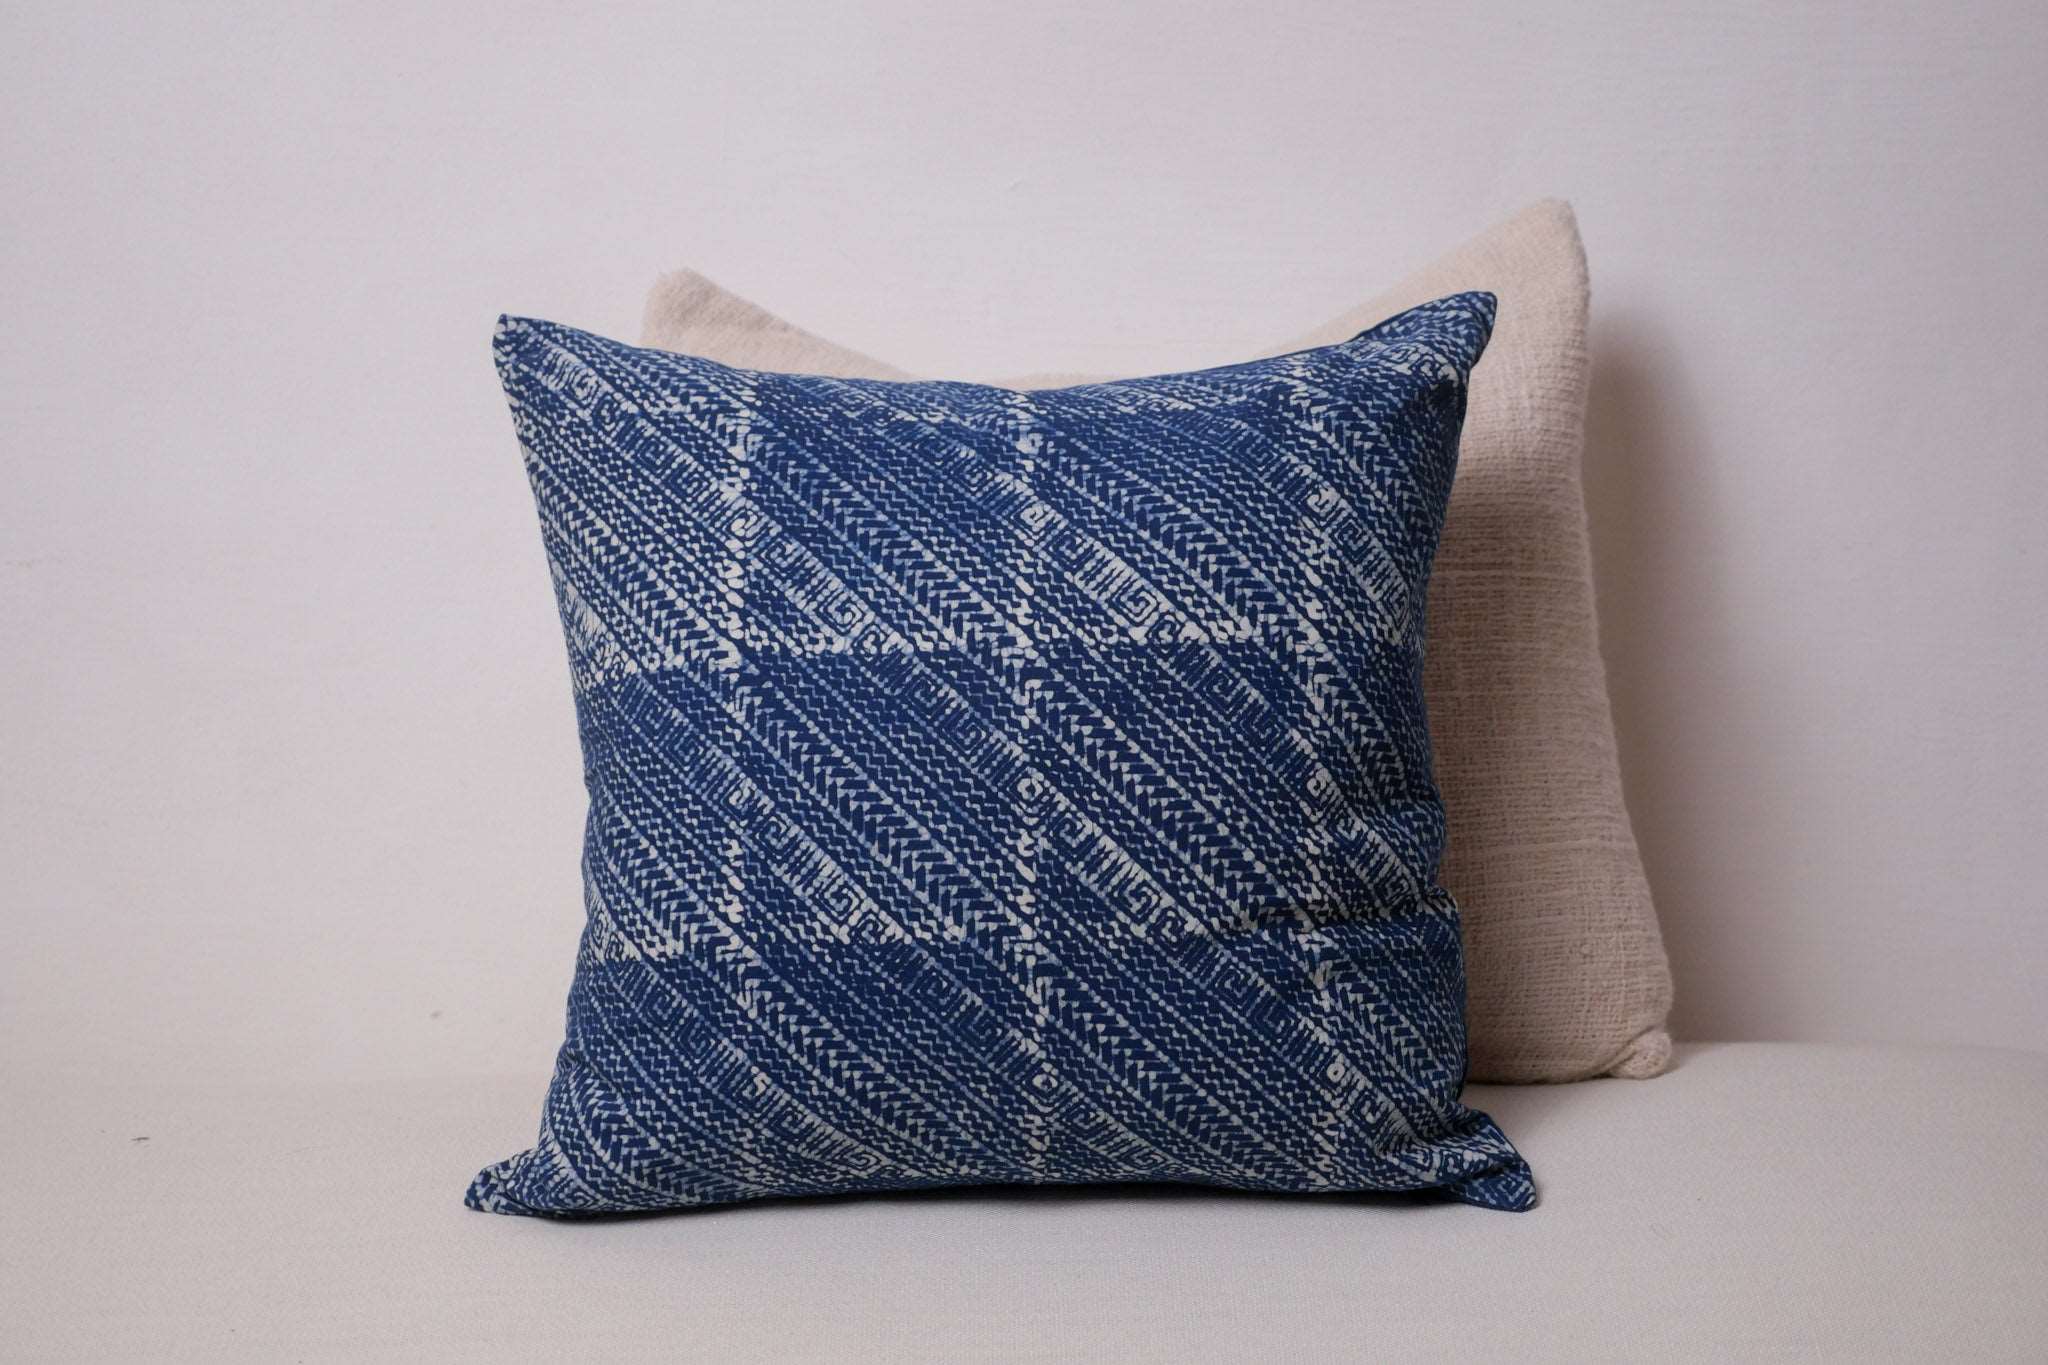 Cushion naturally dyed in indigo, wax relief dye.